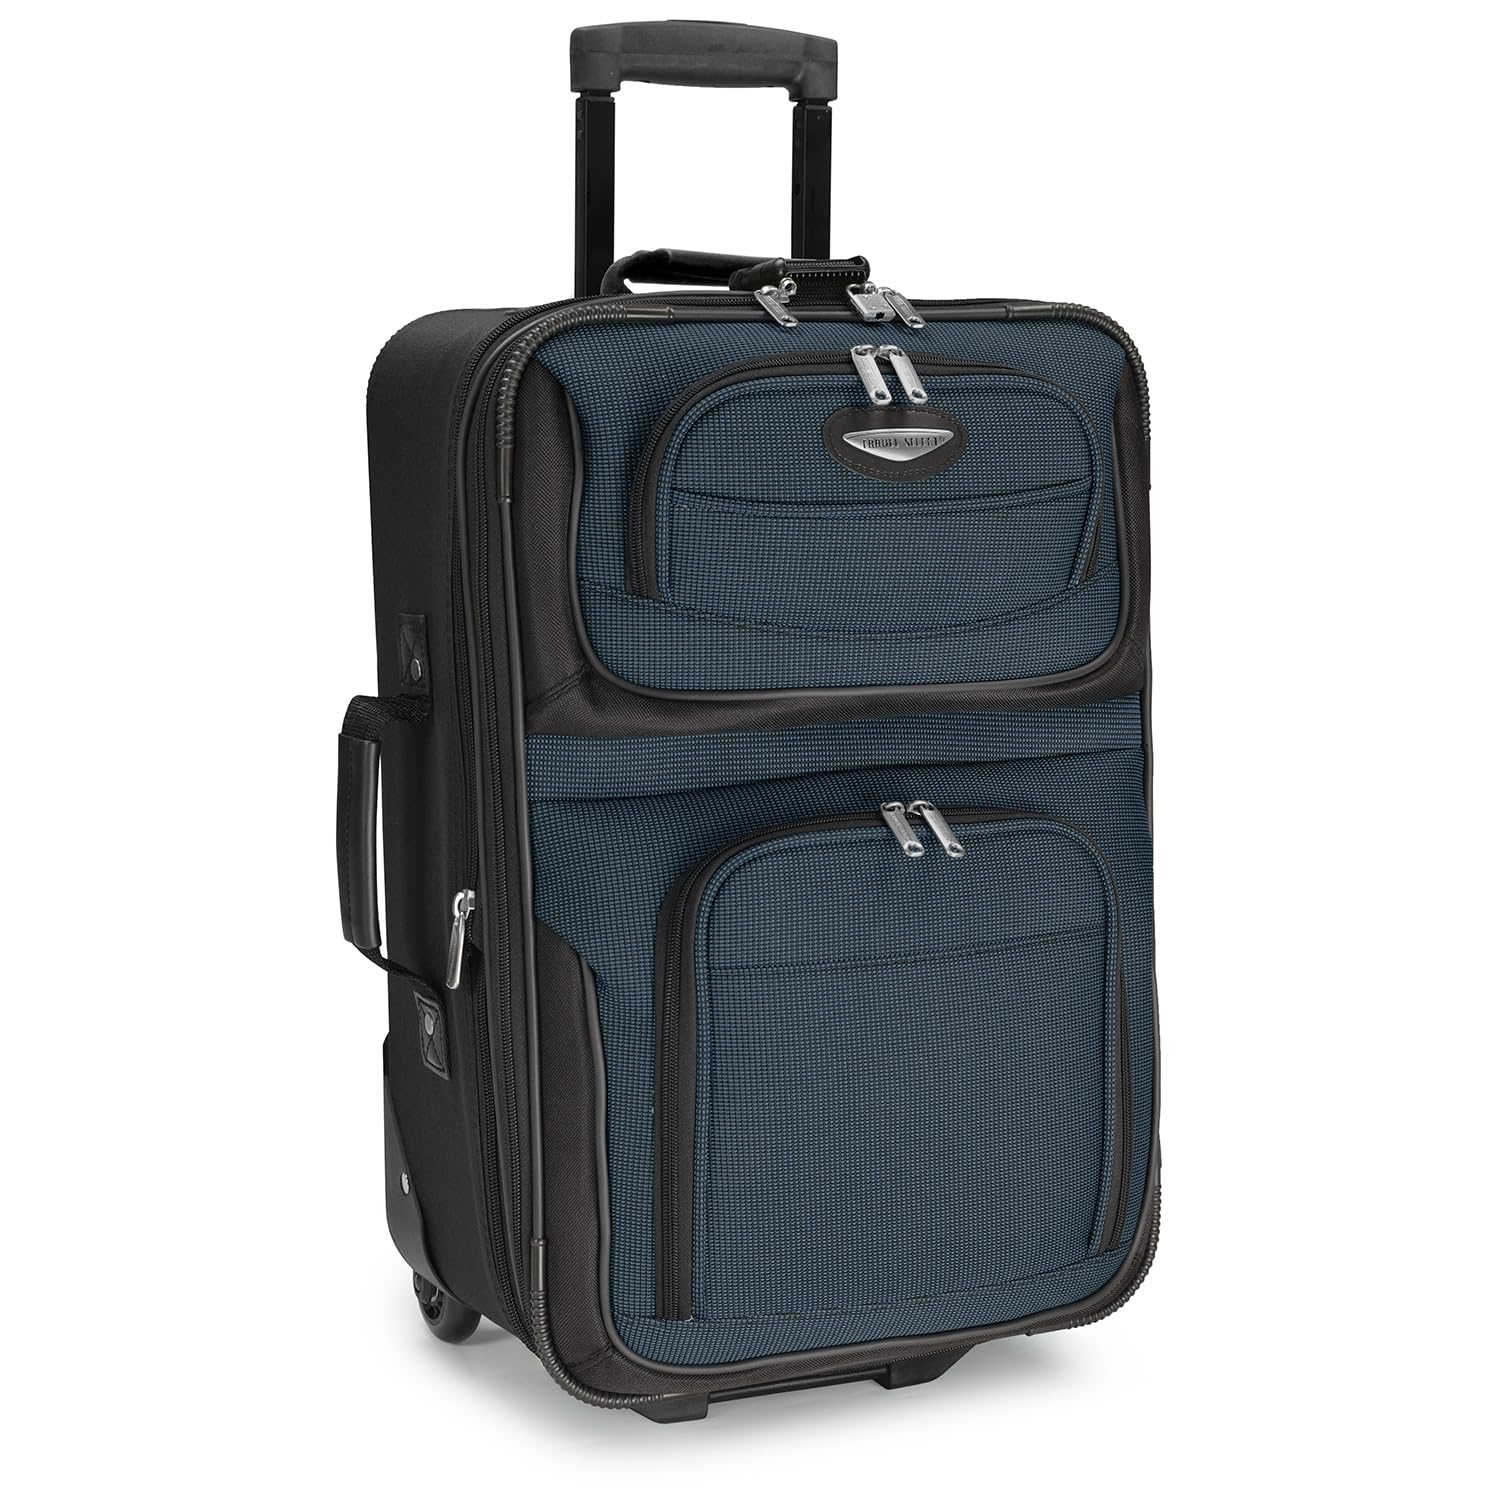 Travel Select Amsterdam Softside Expandable Rolling Luggage, TSA-Approved, Lightweight, Navy, Carry-on 21-Inch